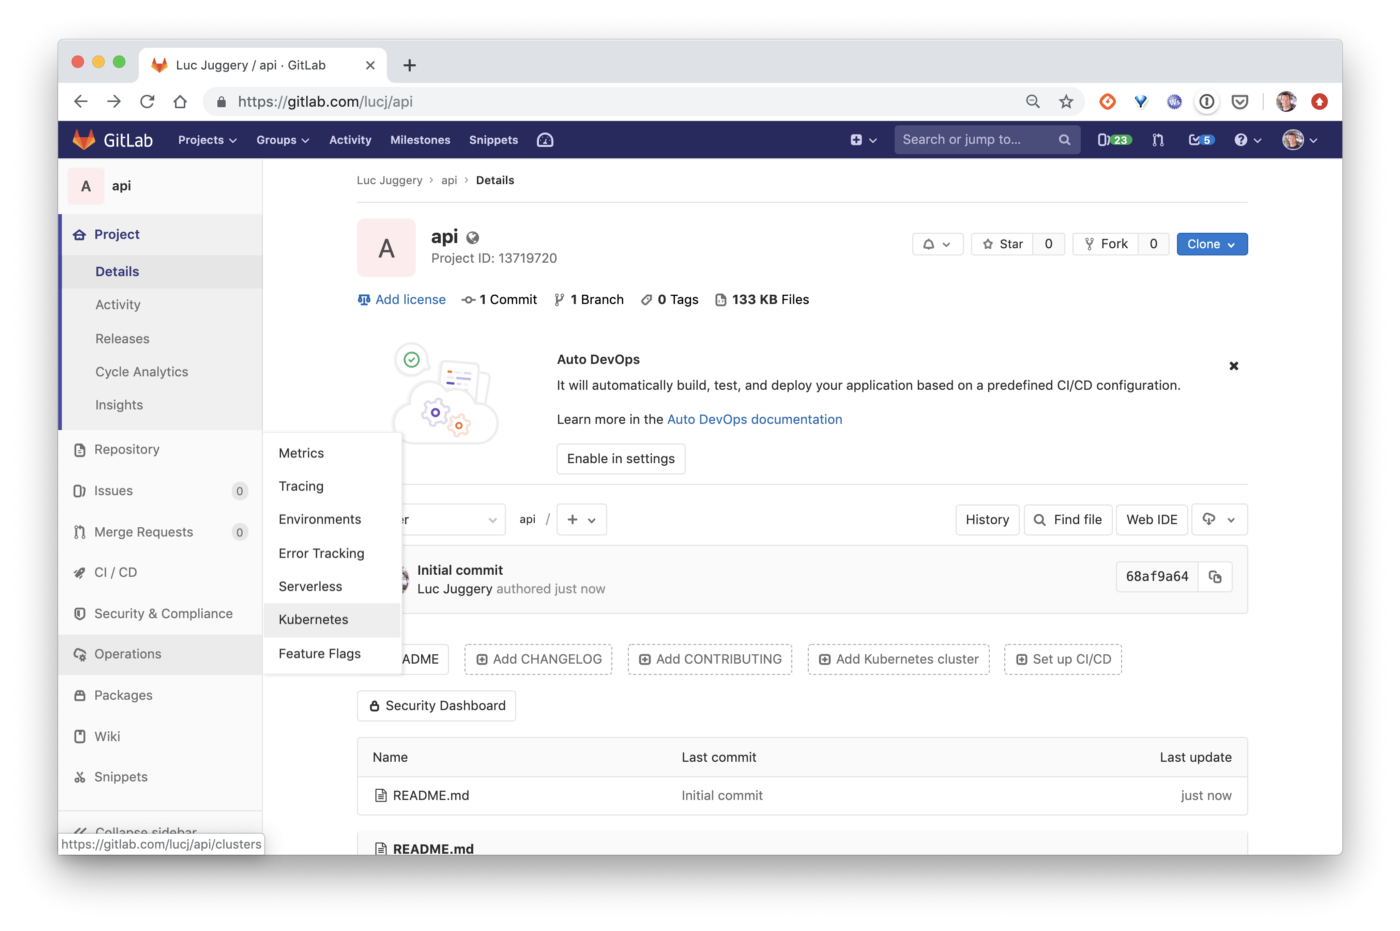 content/wechat/articles/2020/05/2020-05-06-using-a-k3s-kubernetes-cluster-for-your-gitlab-project/kubernetes-menu.png